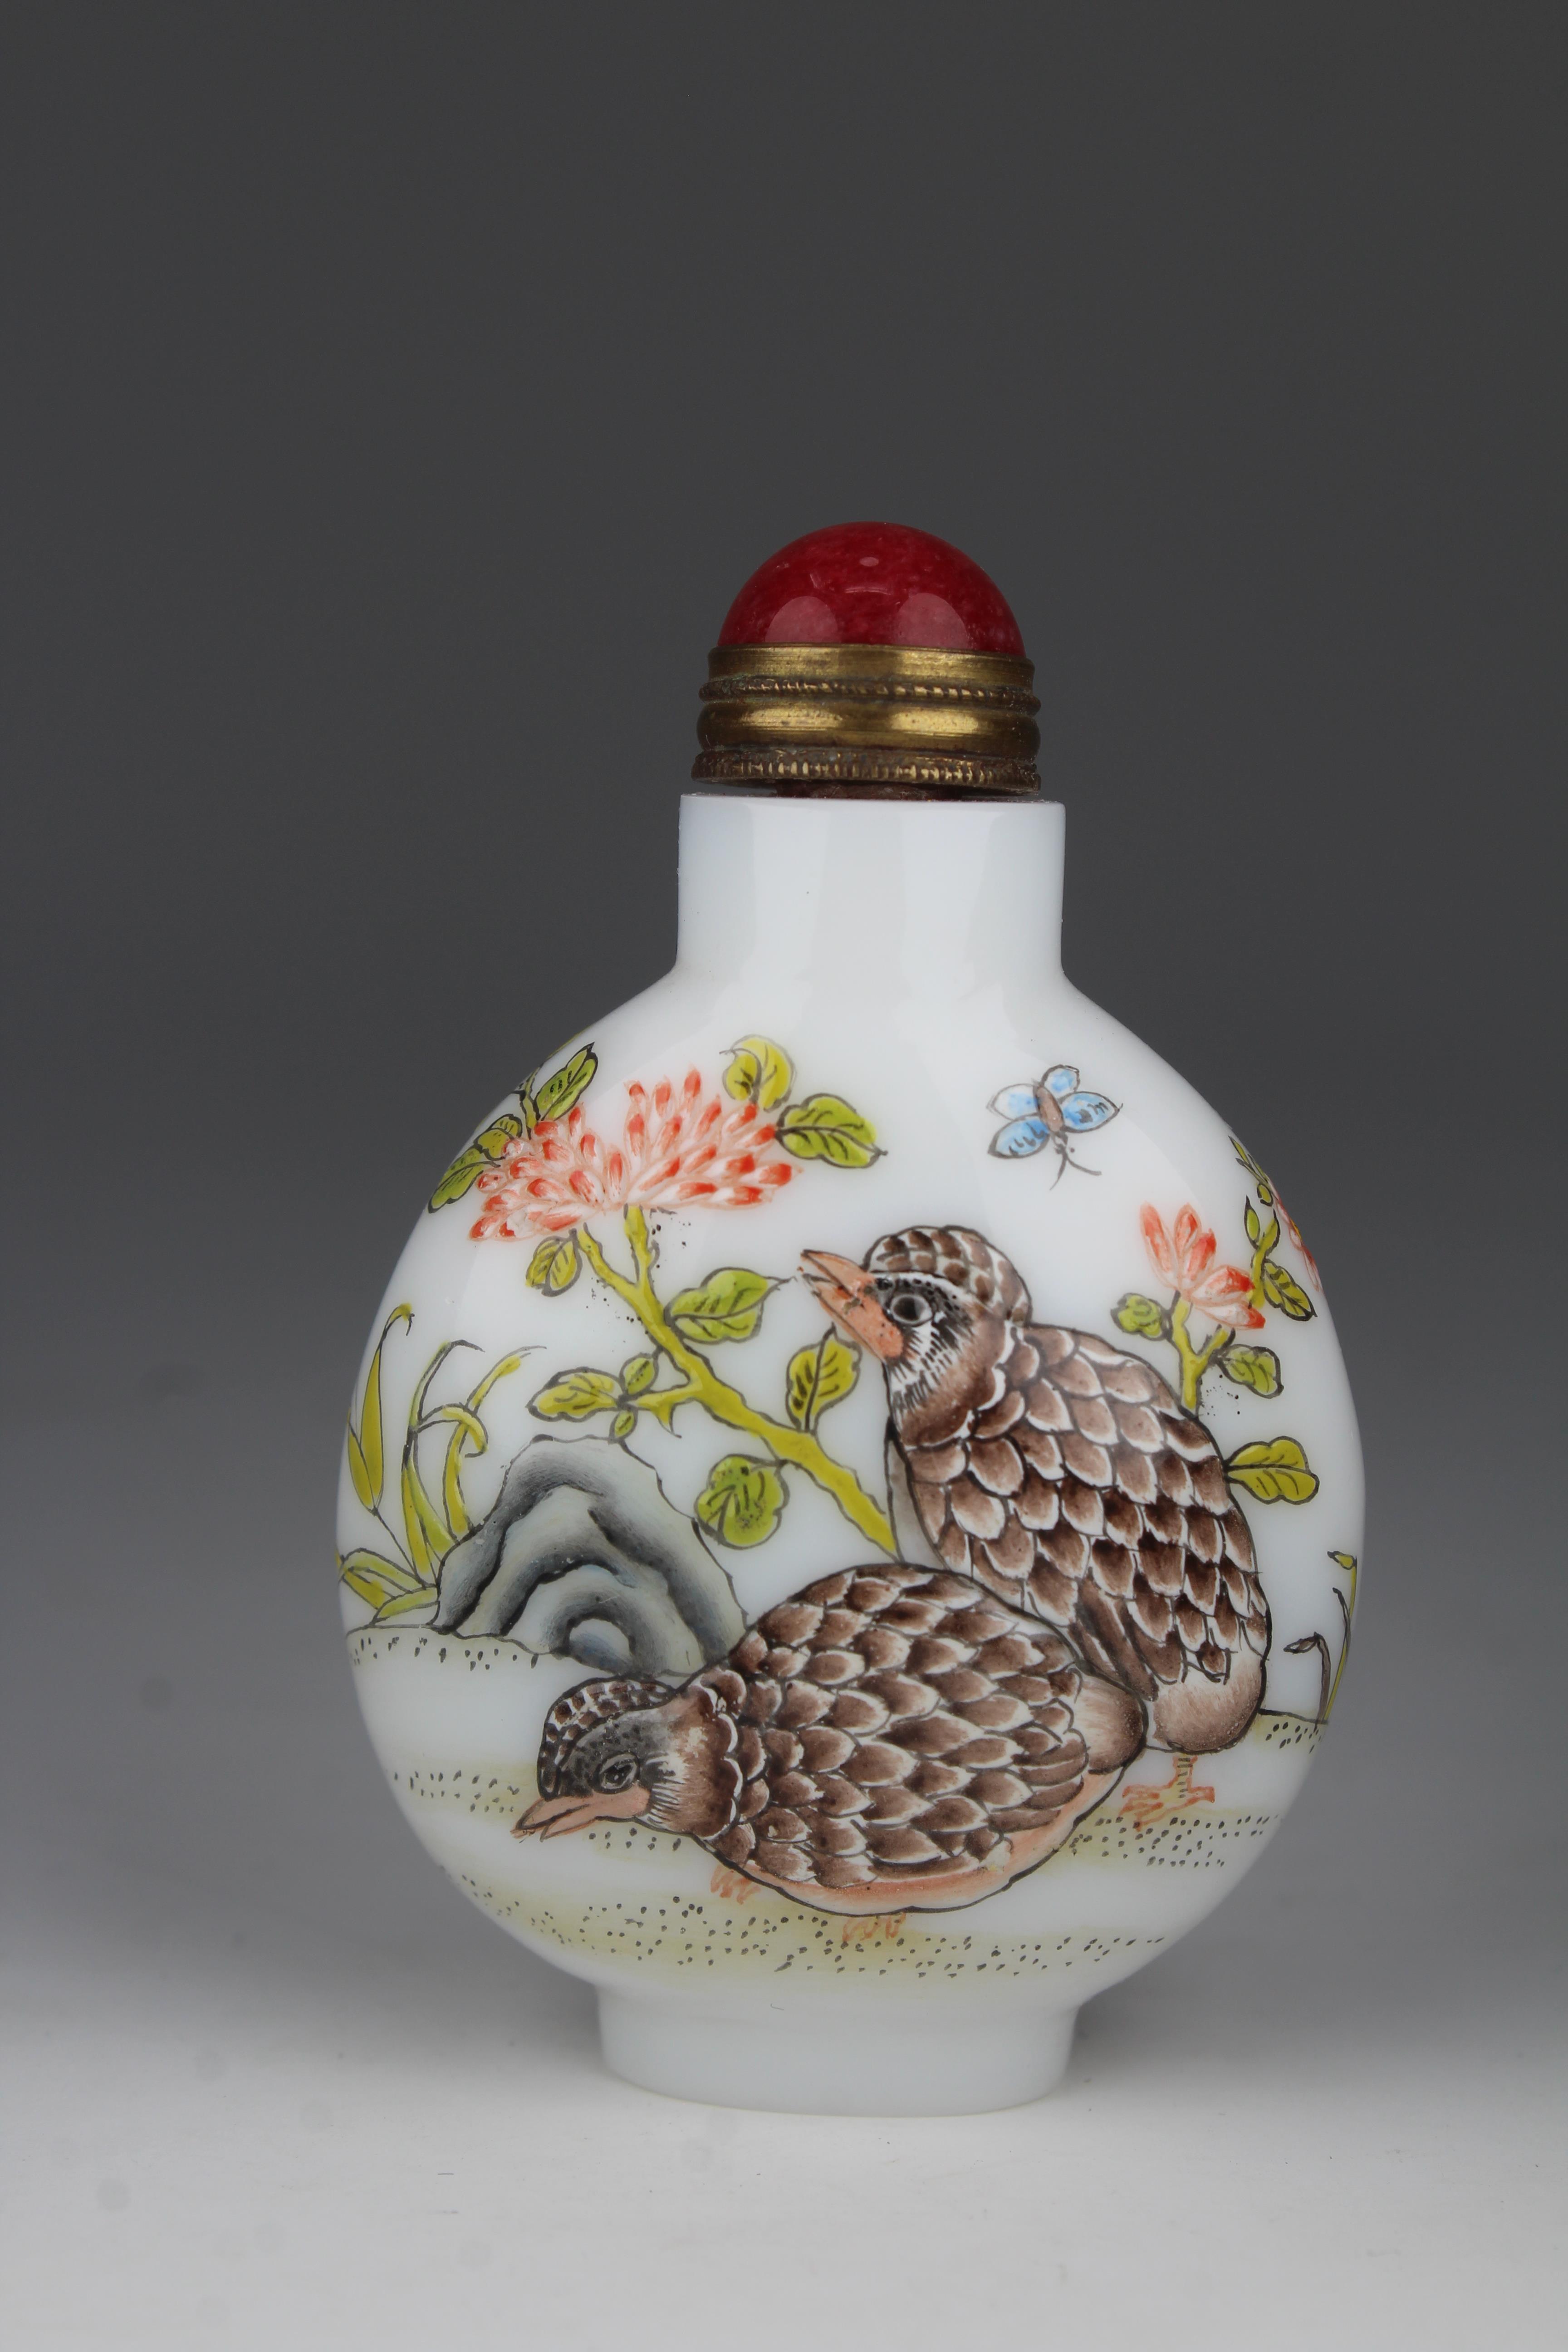 Unusual Chinese Enameled Glass Snuff Bottle - Image 2 of 5